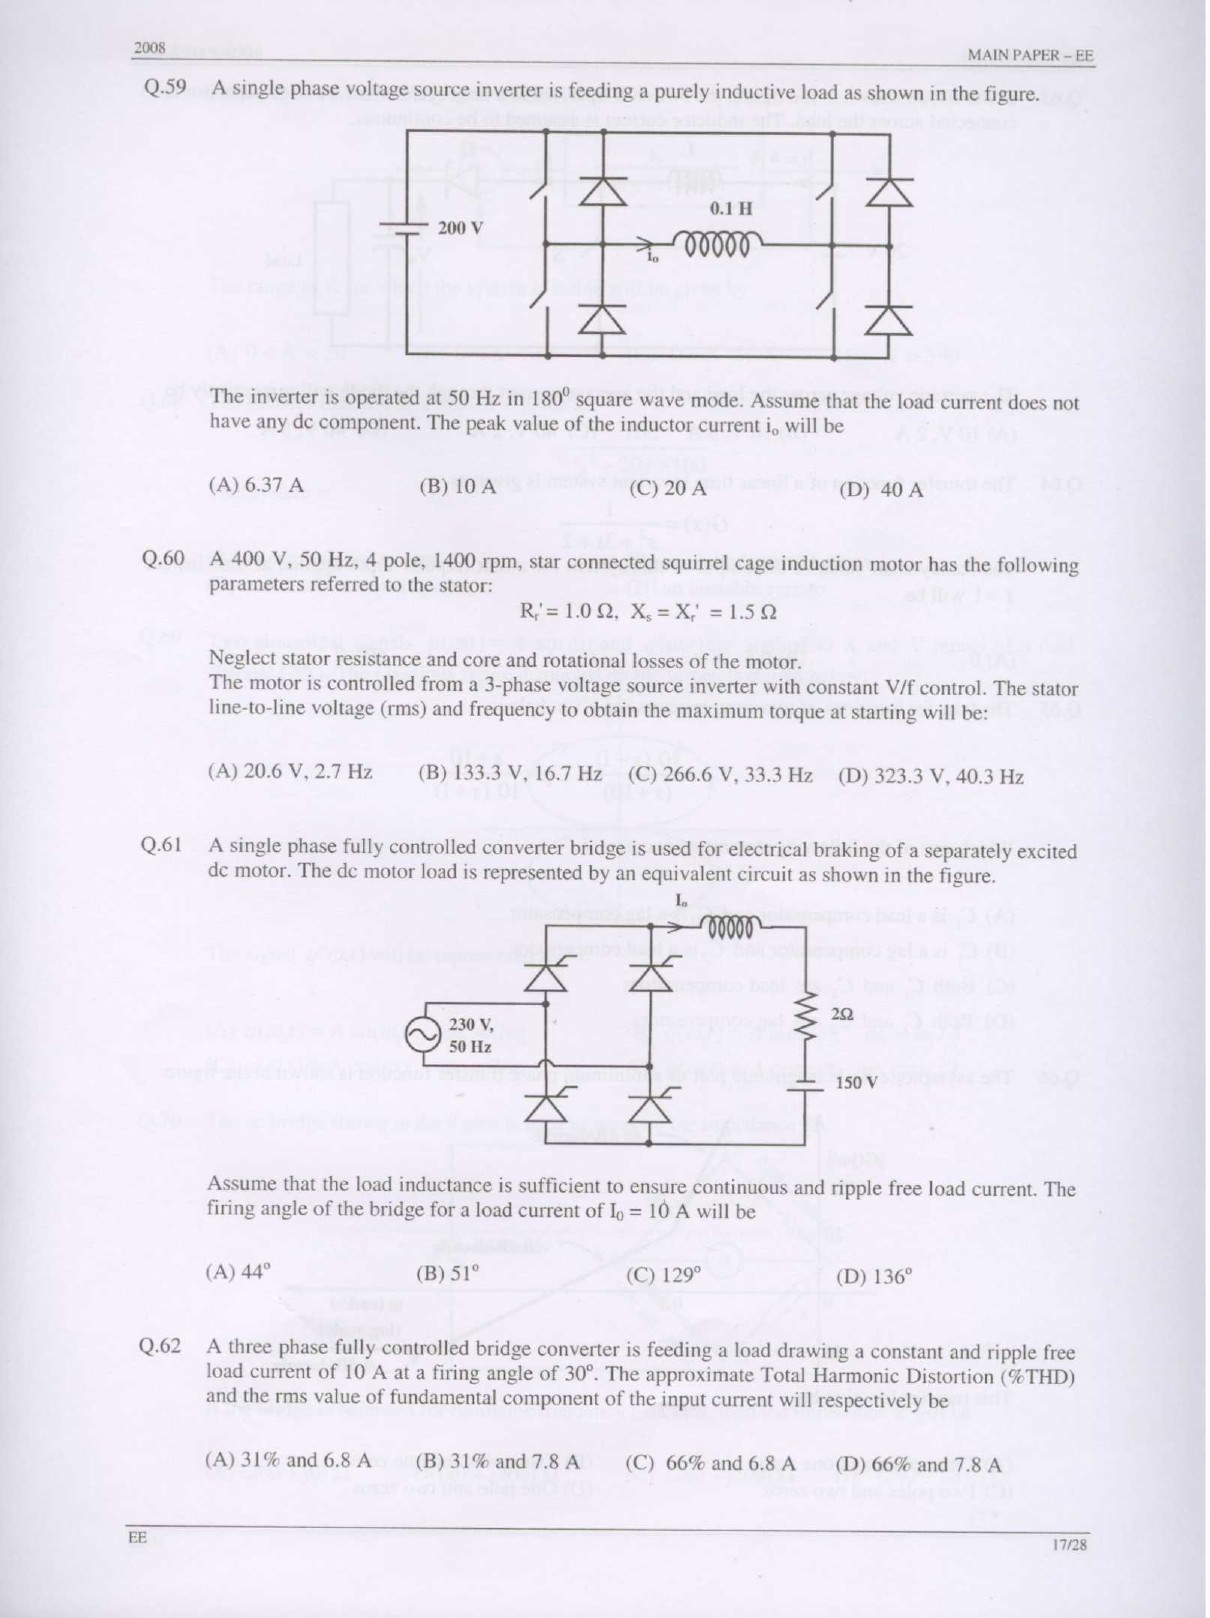 GATE Exam Question Paper 2008 Electrical Engineering 17